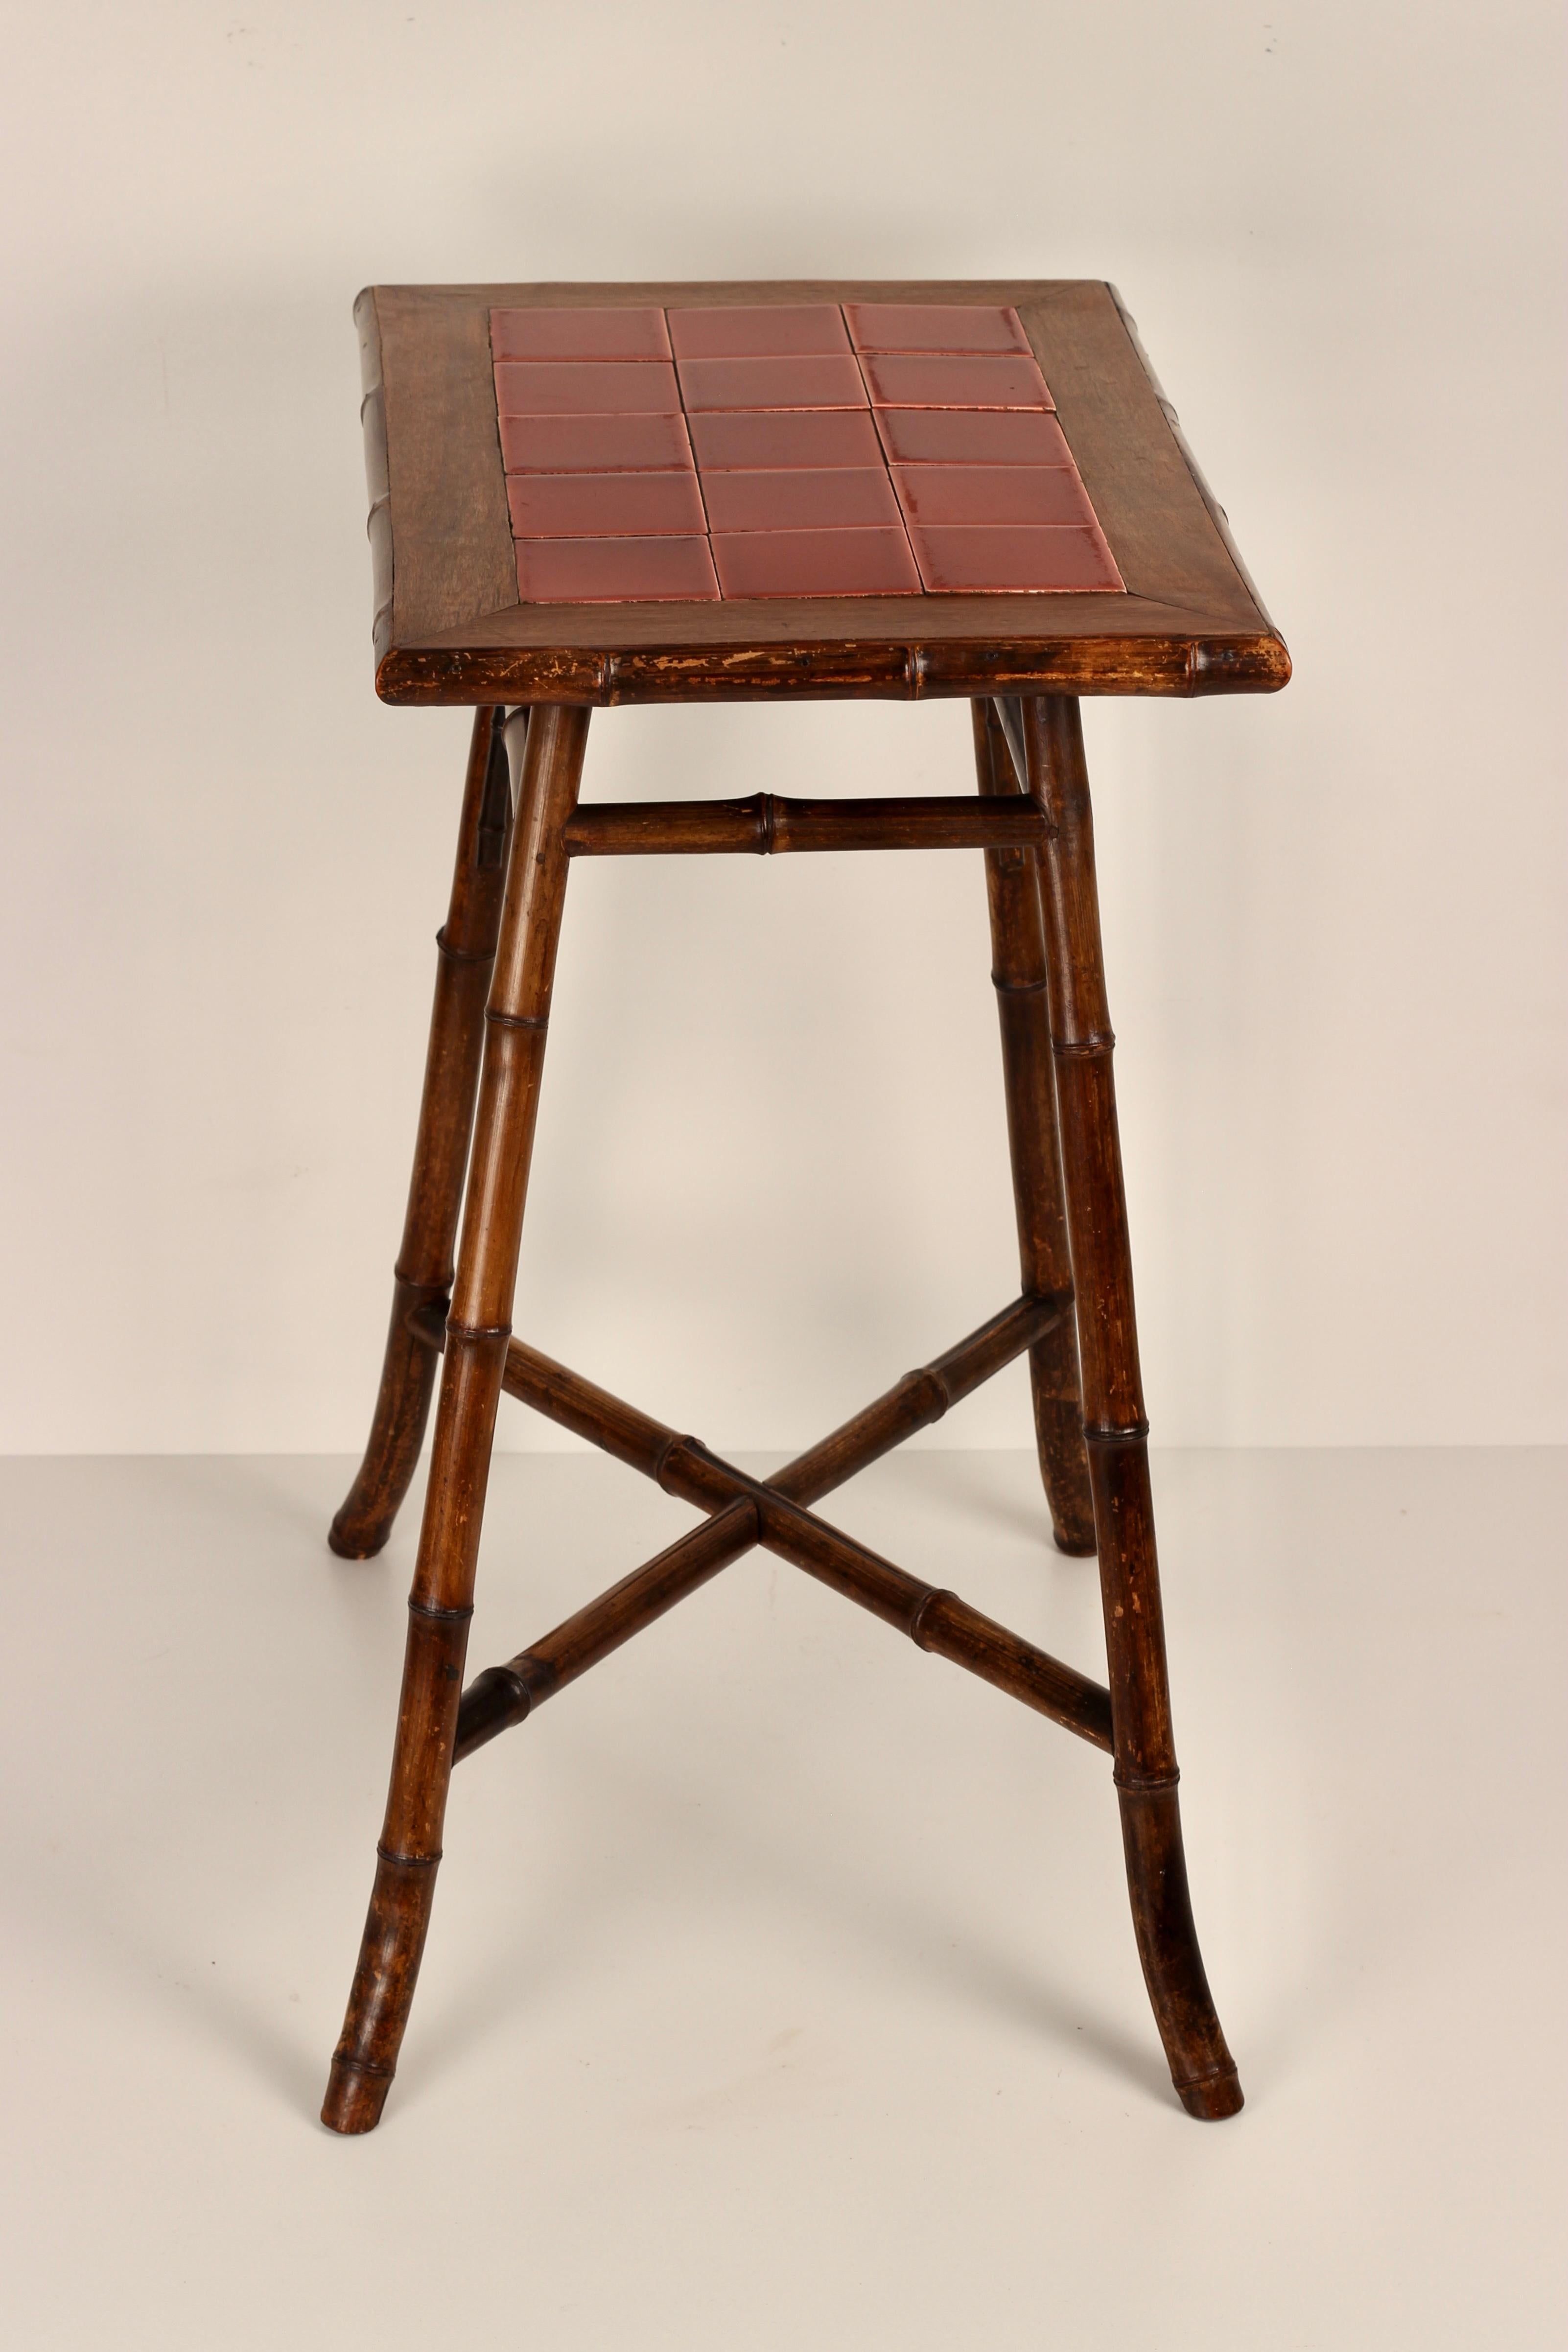 Boho Chic Steam Bent Bamboo Side Table with Deep Red Ceramic Tiled Top 1890’s In Good Condition For Sale In London, GB